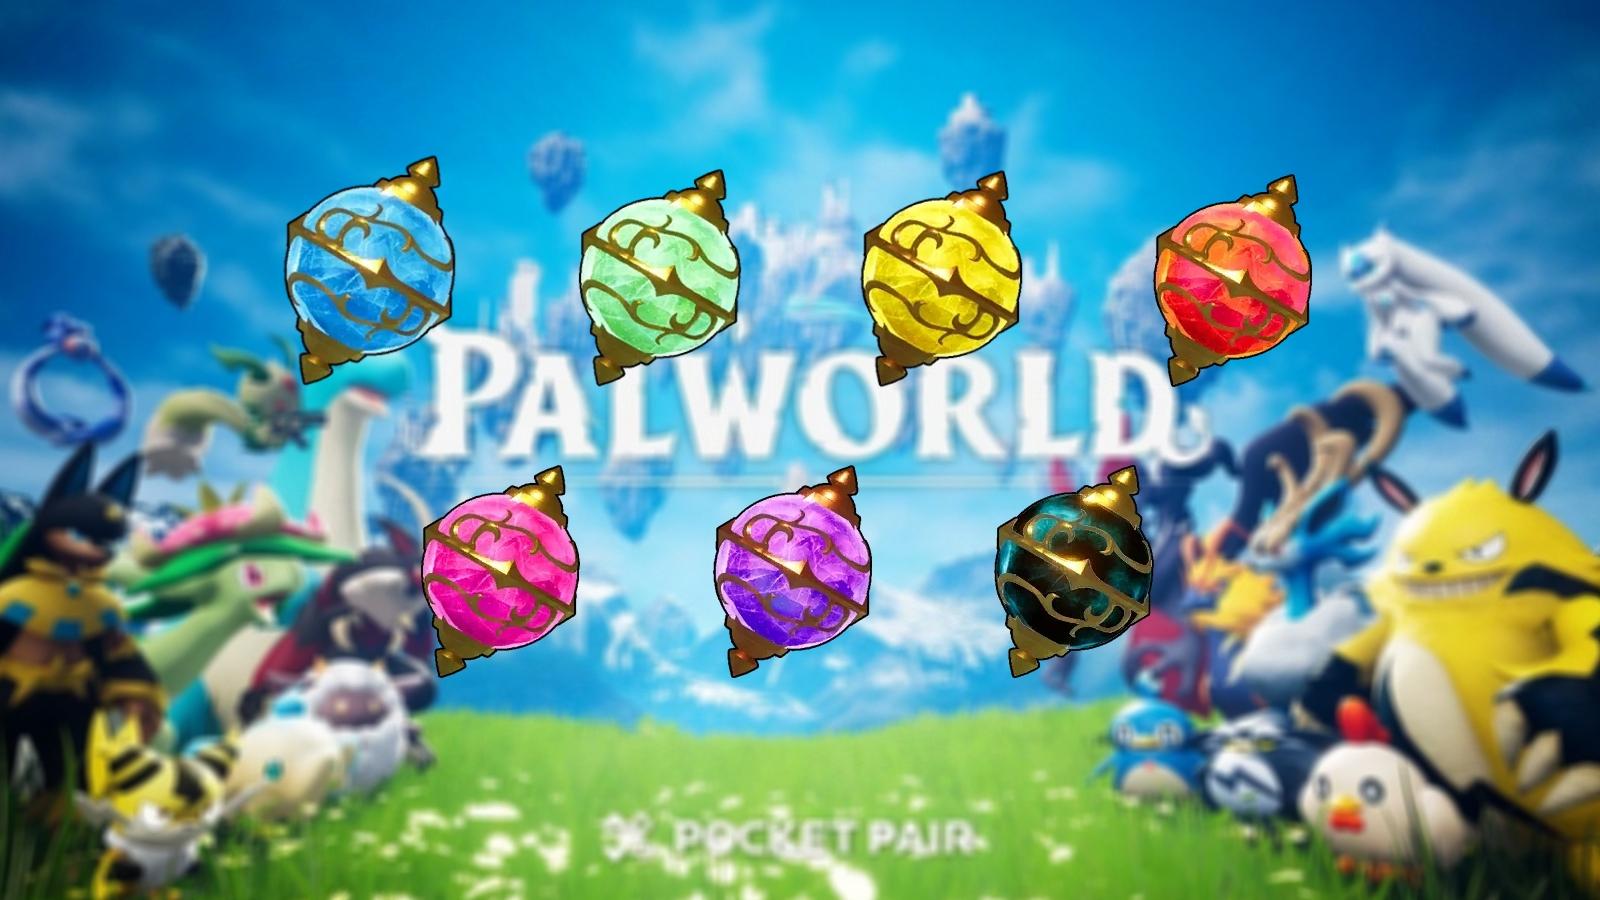 Palworld Cover with Spheres